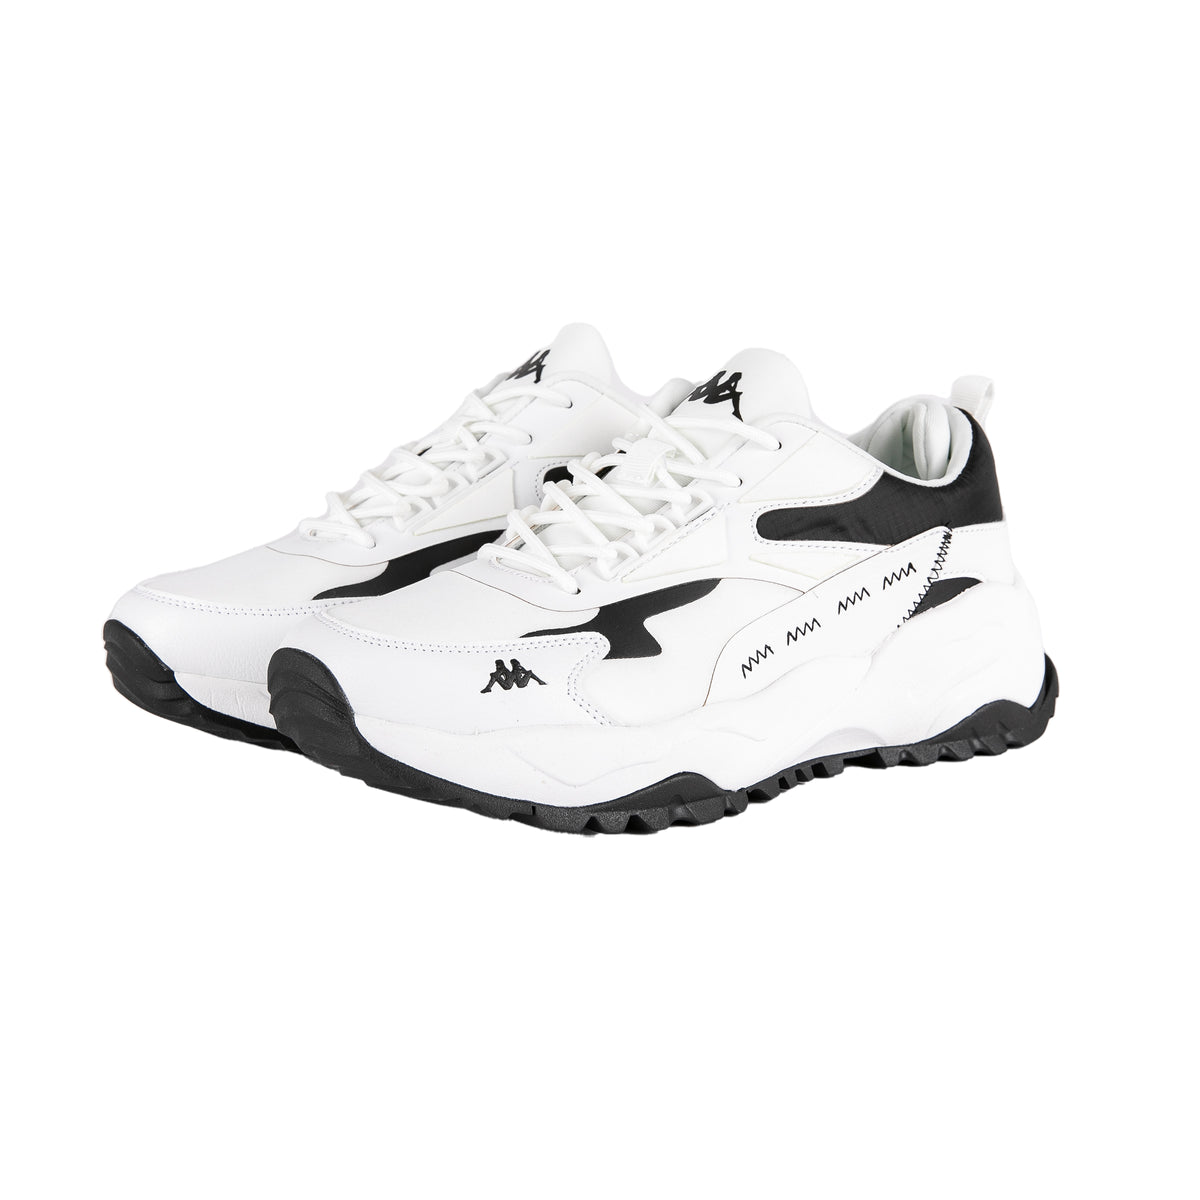 Shop online - US Kappa Sneakers Authentic White Black Altin 3 for